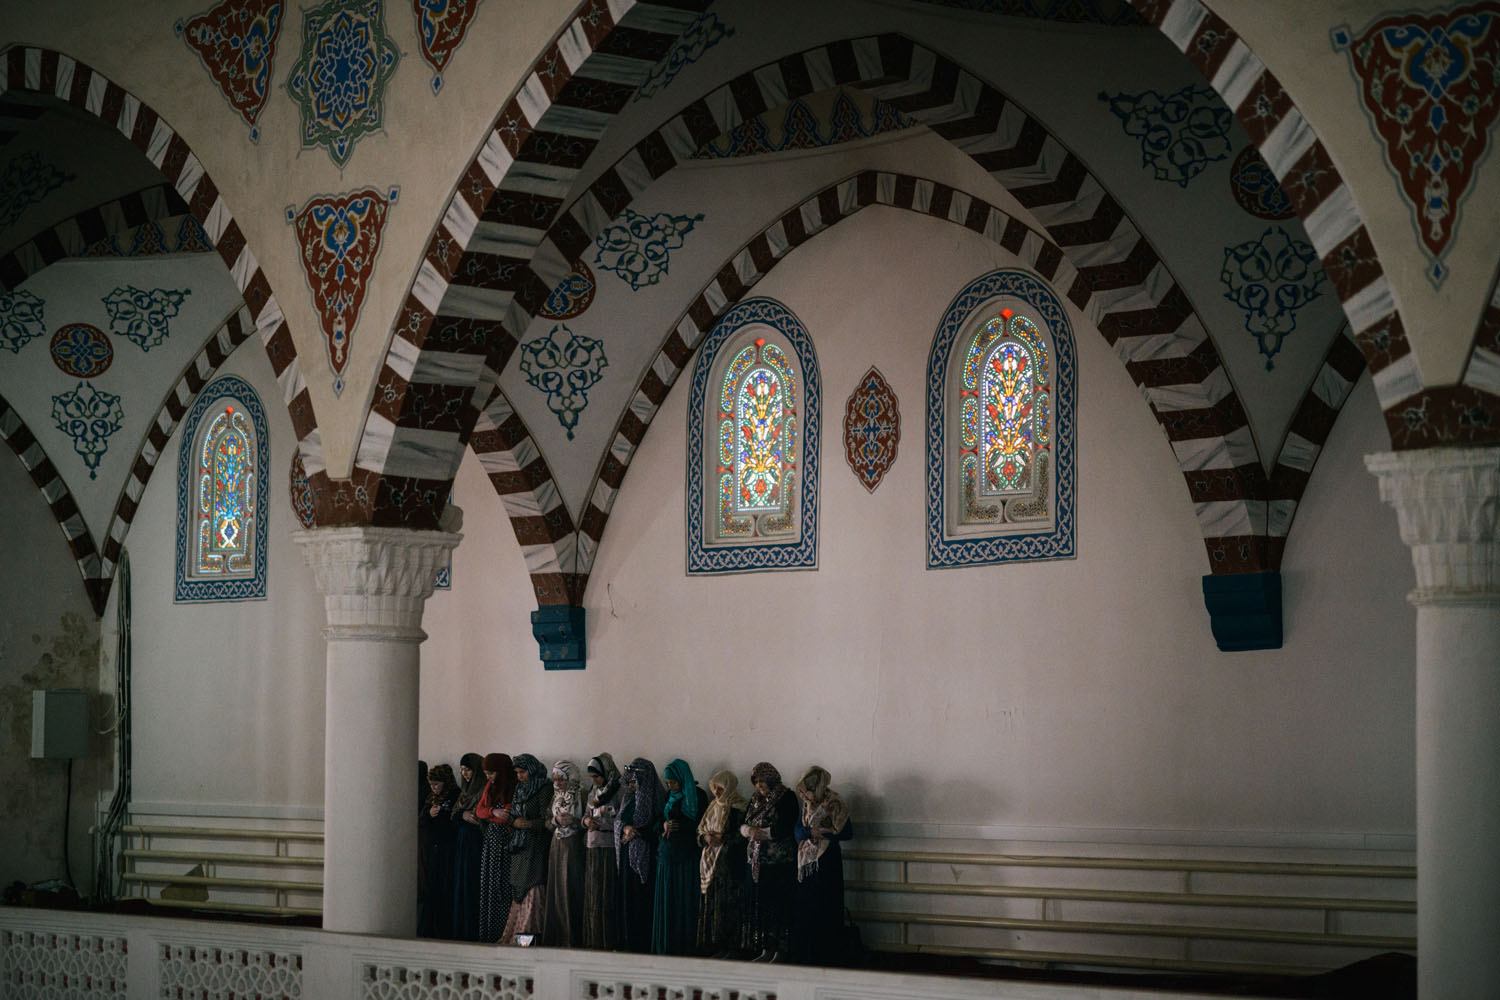 Women pray in main mosque of Dagestan in Makhachkala on May 14, 2013.